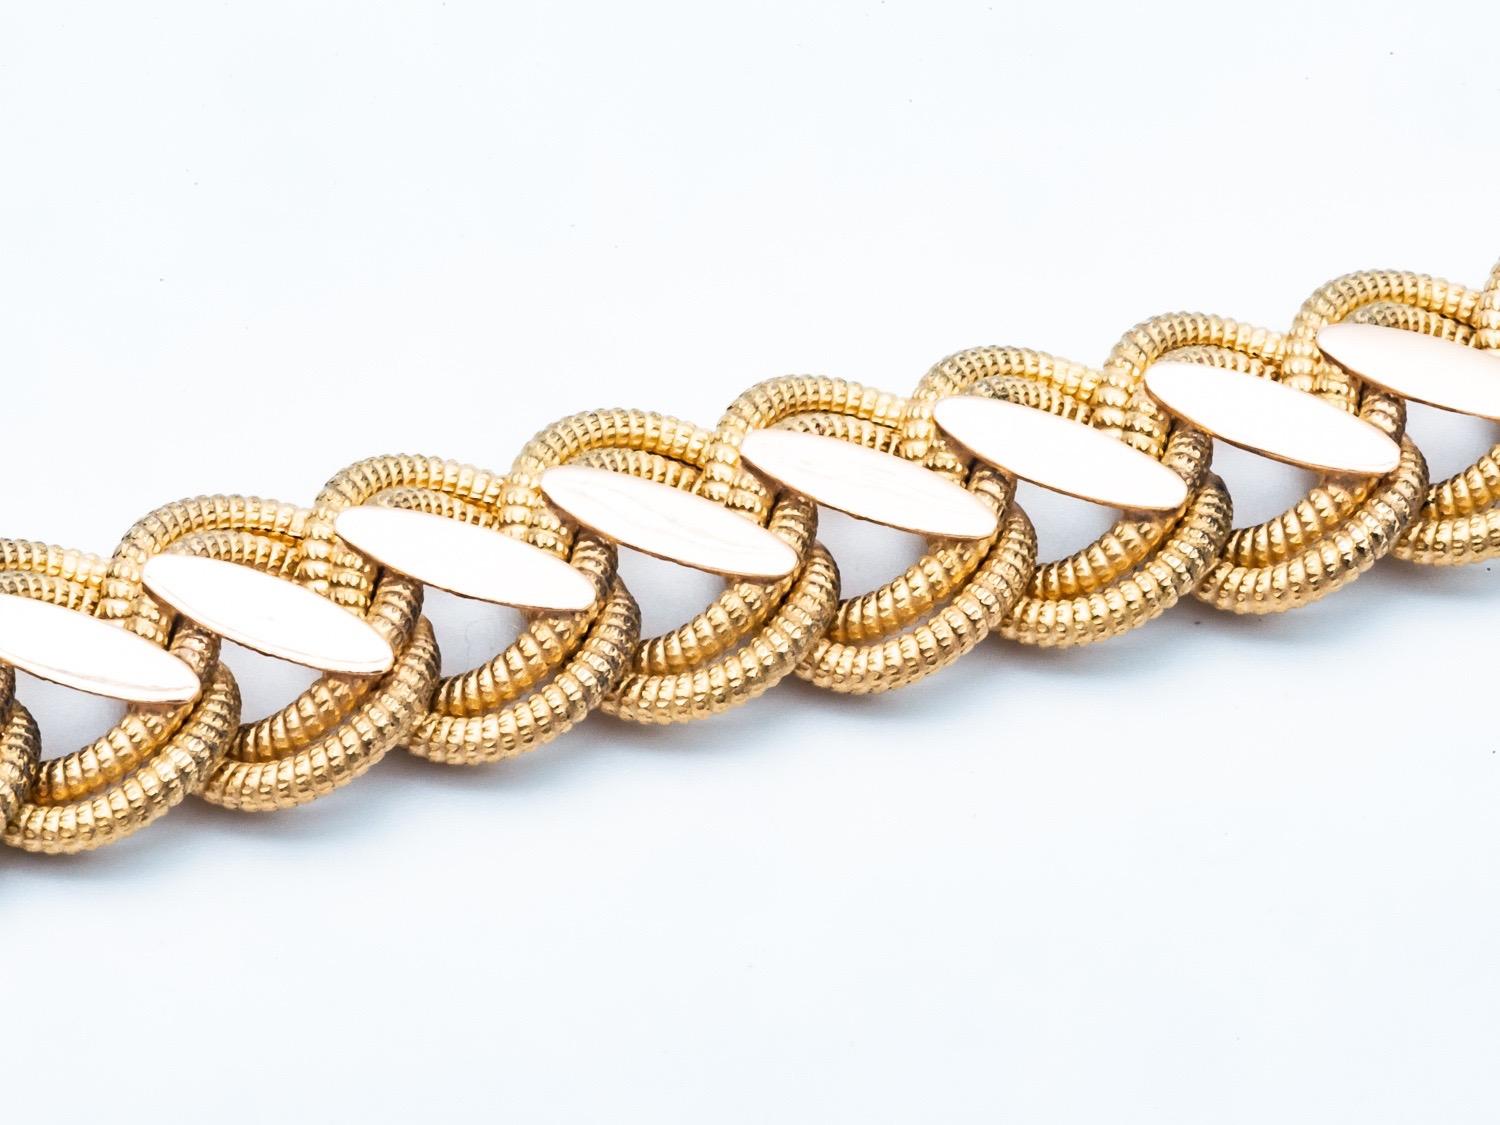 This magnificent 18K yellow gold bracelet is a true period jewel, embodying the timeless elegance of the 1960s. Crafted with care and expertise, this bracelet features a unique combination of brushed and polished mesh, giving it a refined yet modern